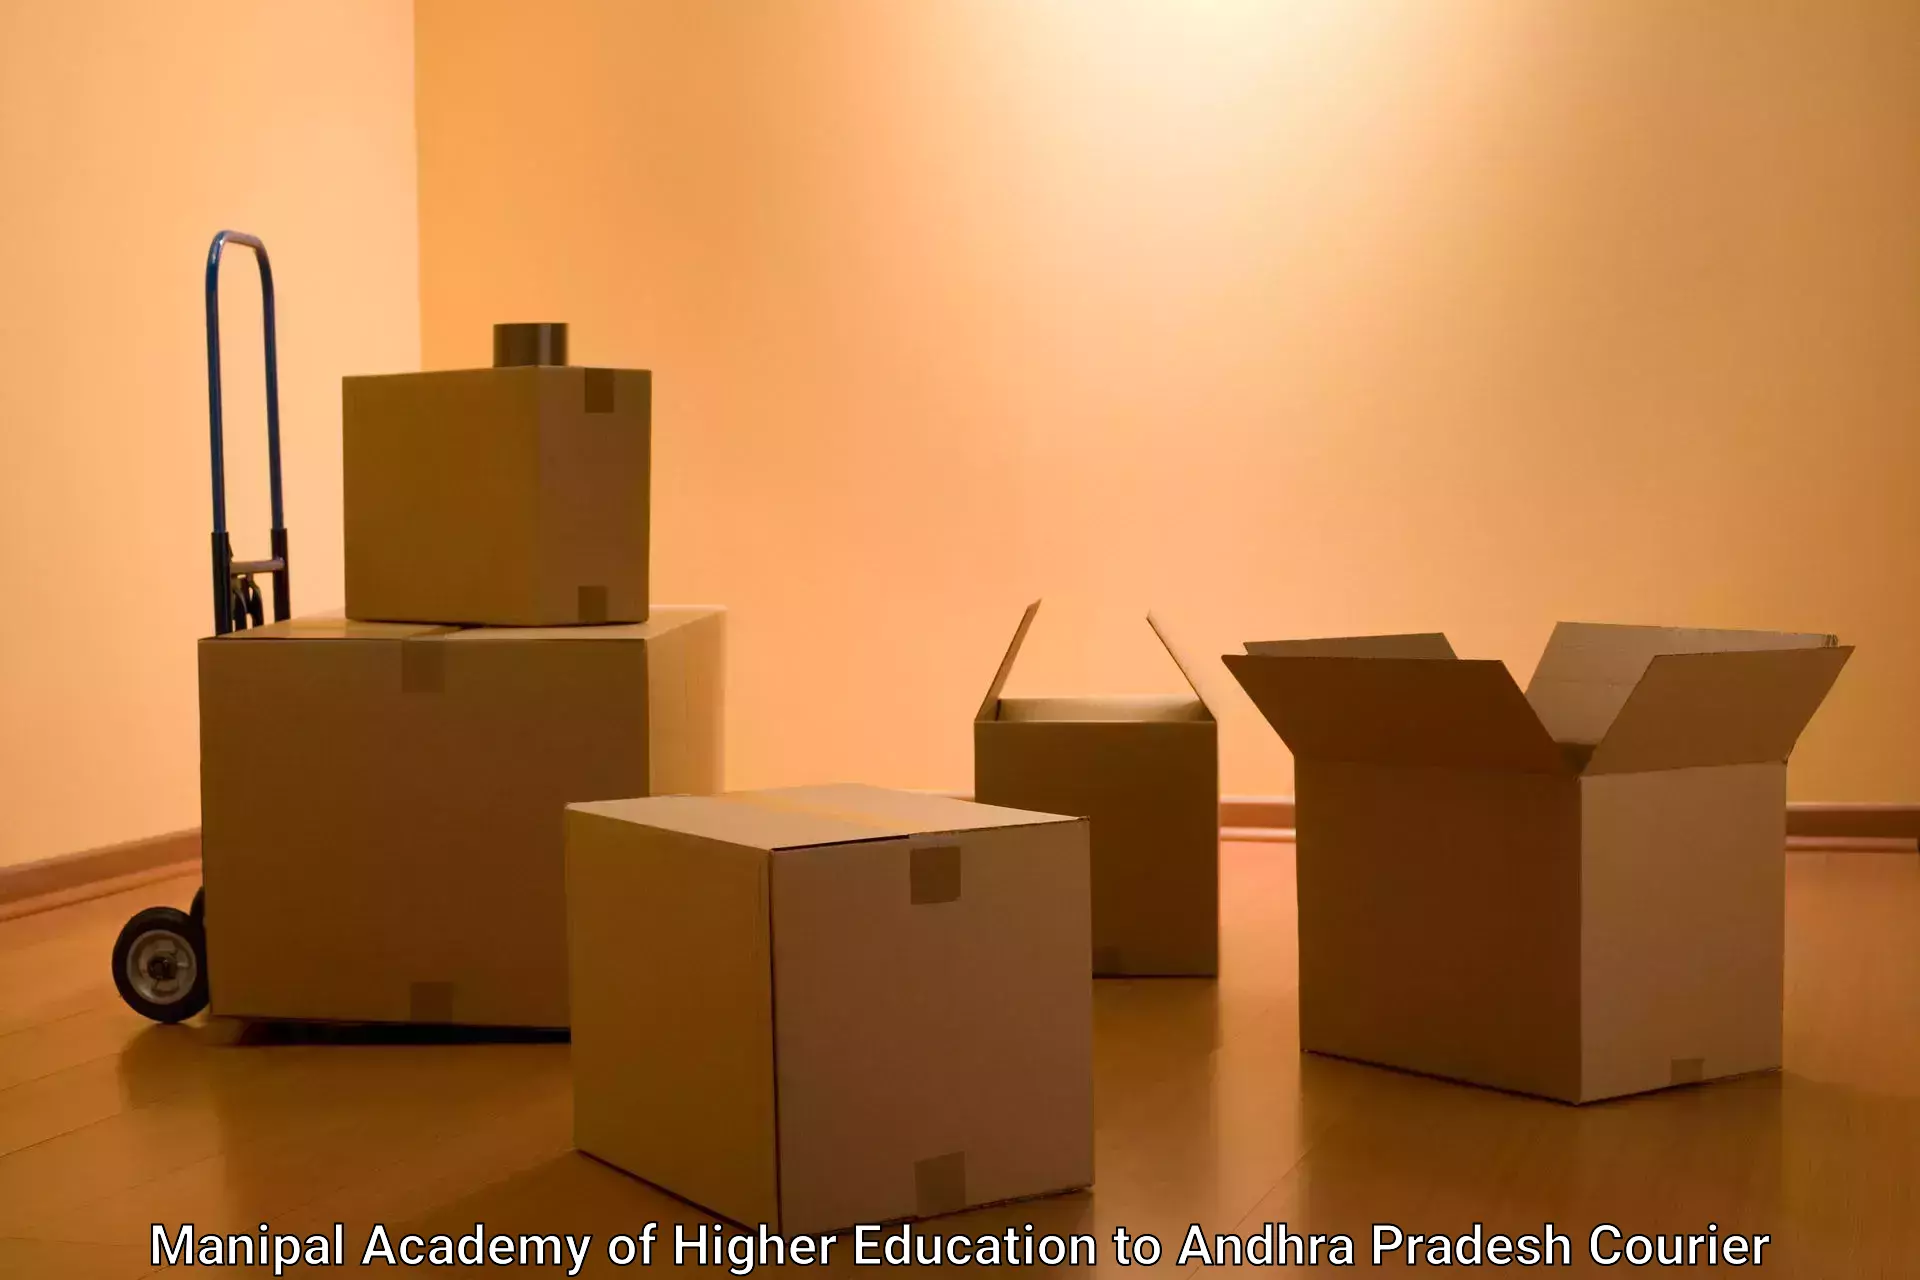 Global shipping solutions Manipal Academy of Higher Education to Andhra Pradesh